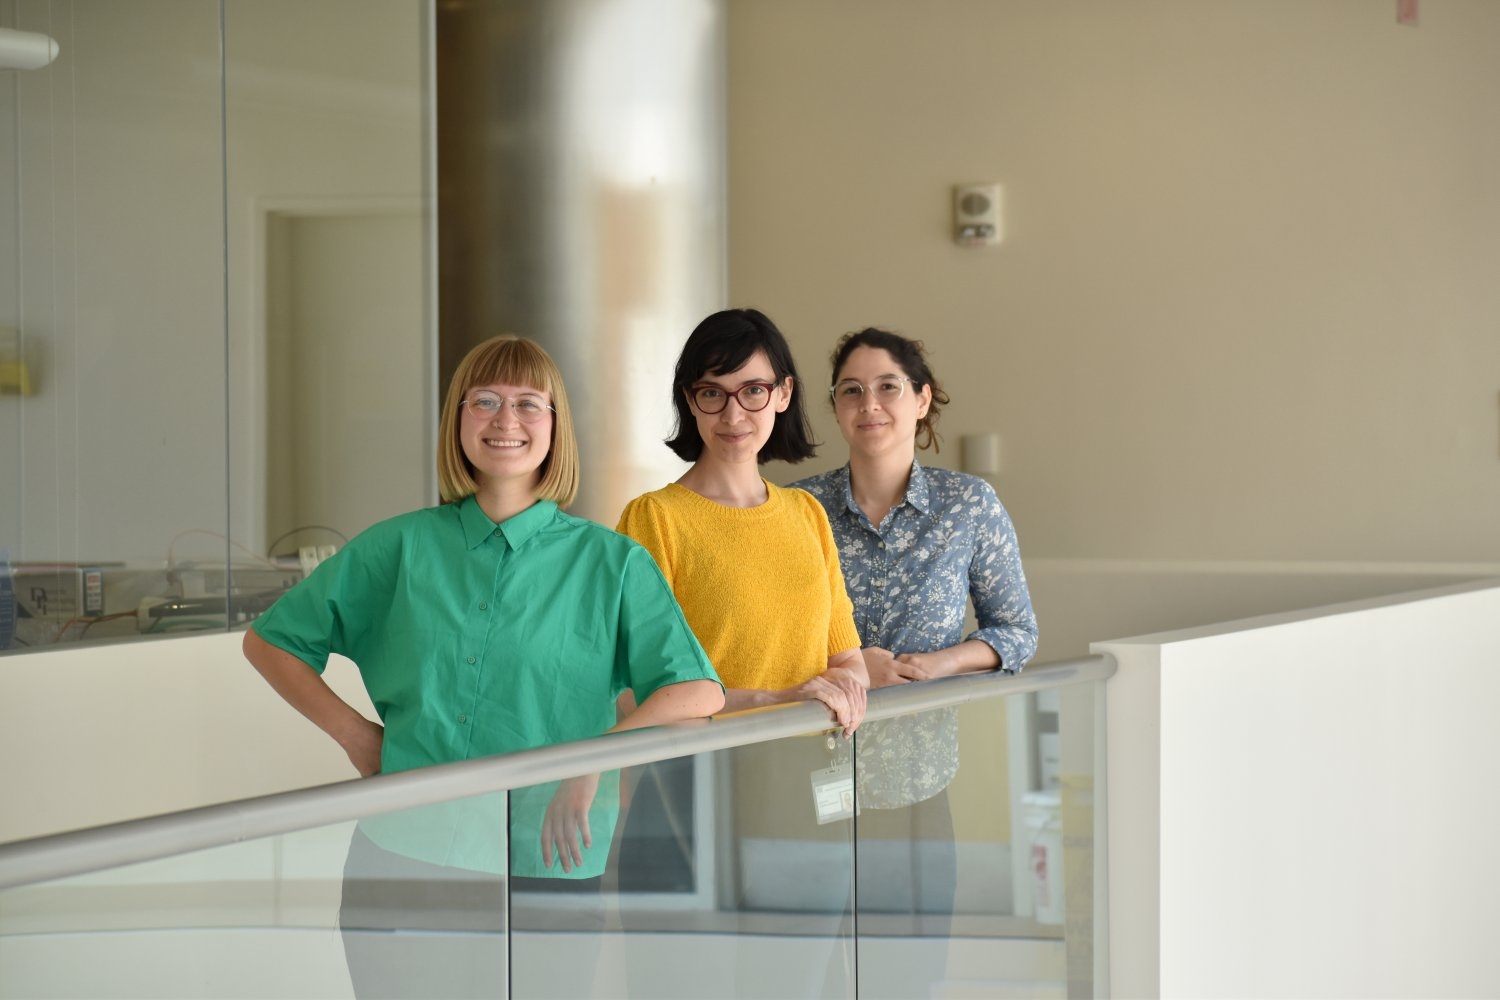 (Left to right) Taylor Baum, Josefina Correa Menendez, and Karla Alejandra Montejo all became doctoral students in the same lab at MIT after participating in the MIT Summer Research Program in Biology and Neuroscience.